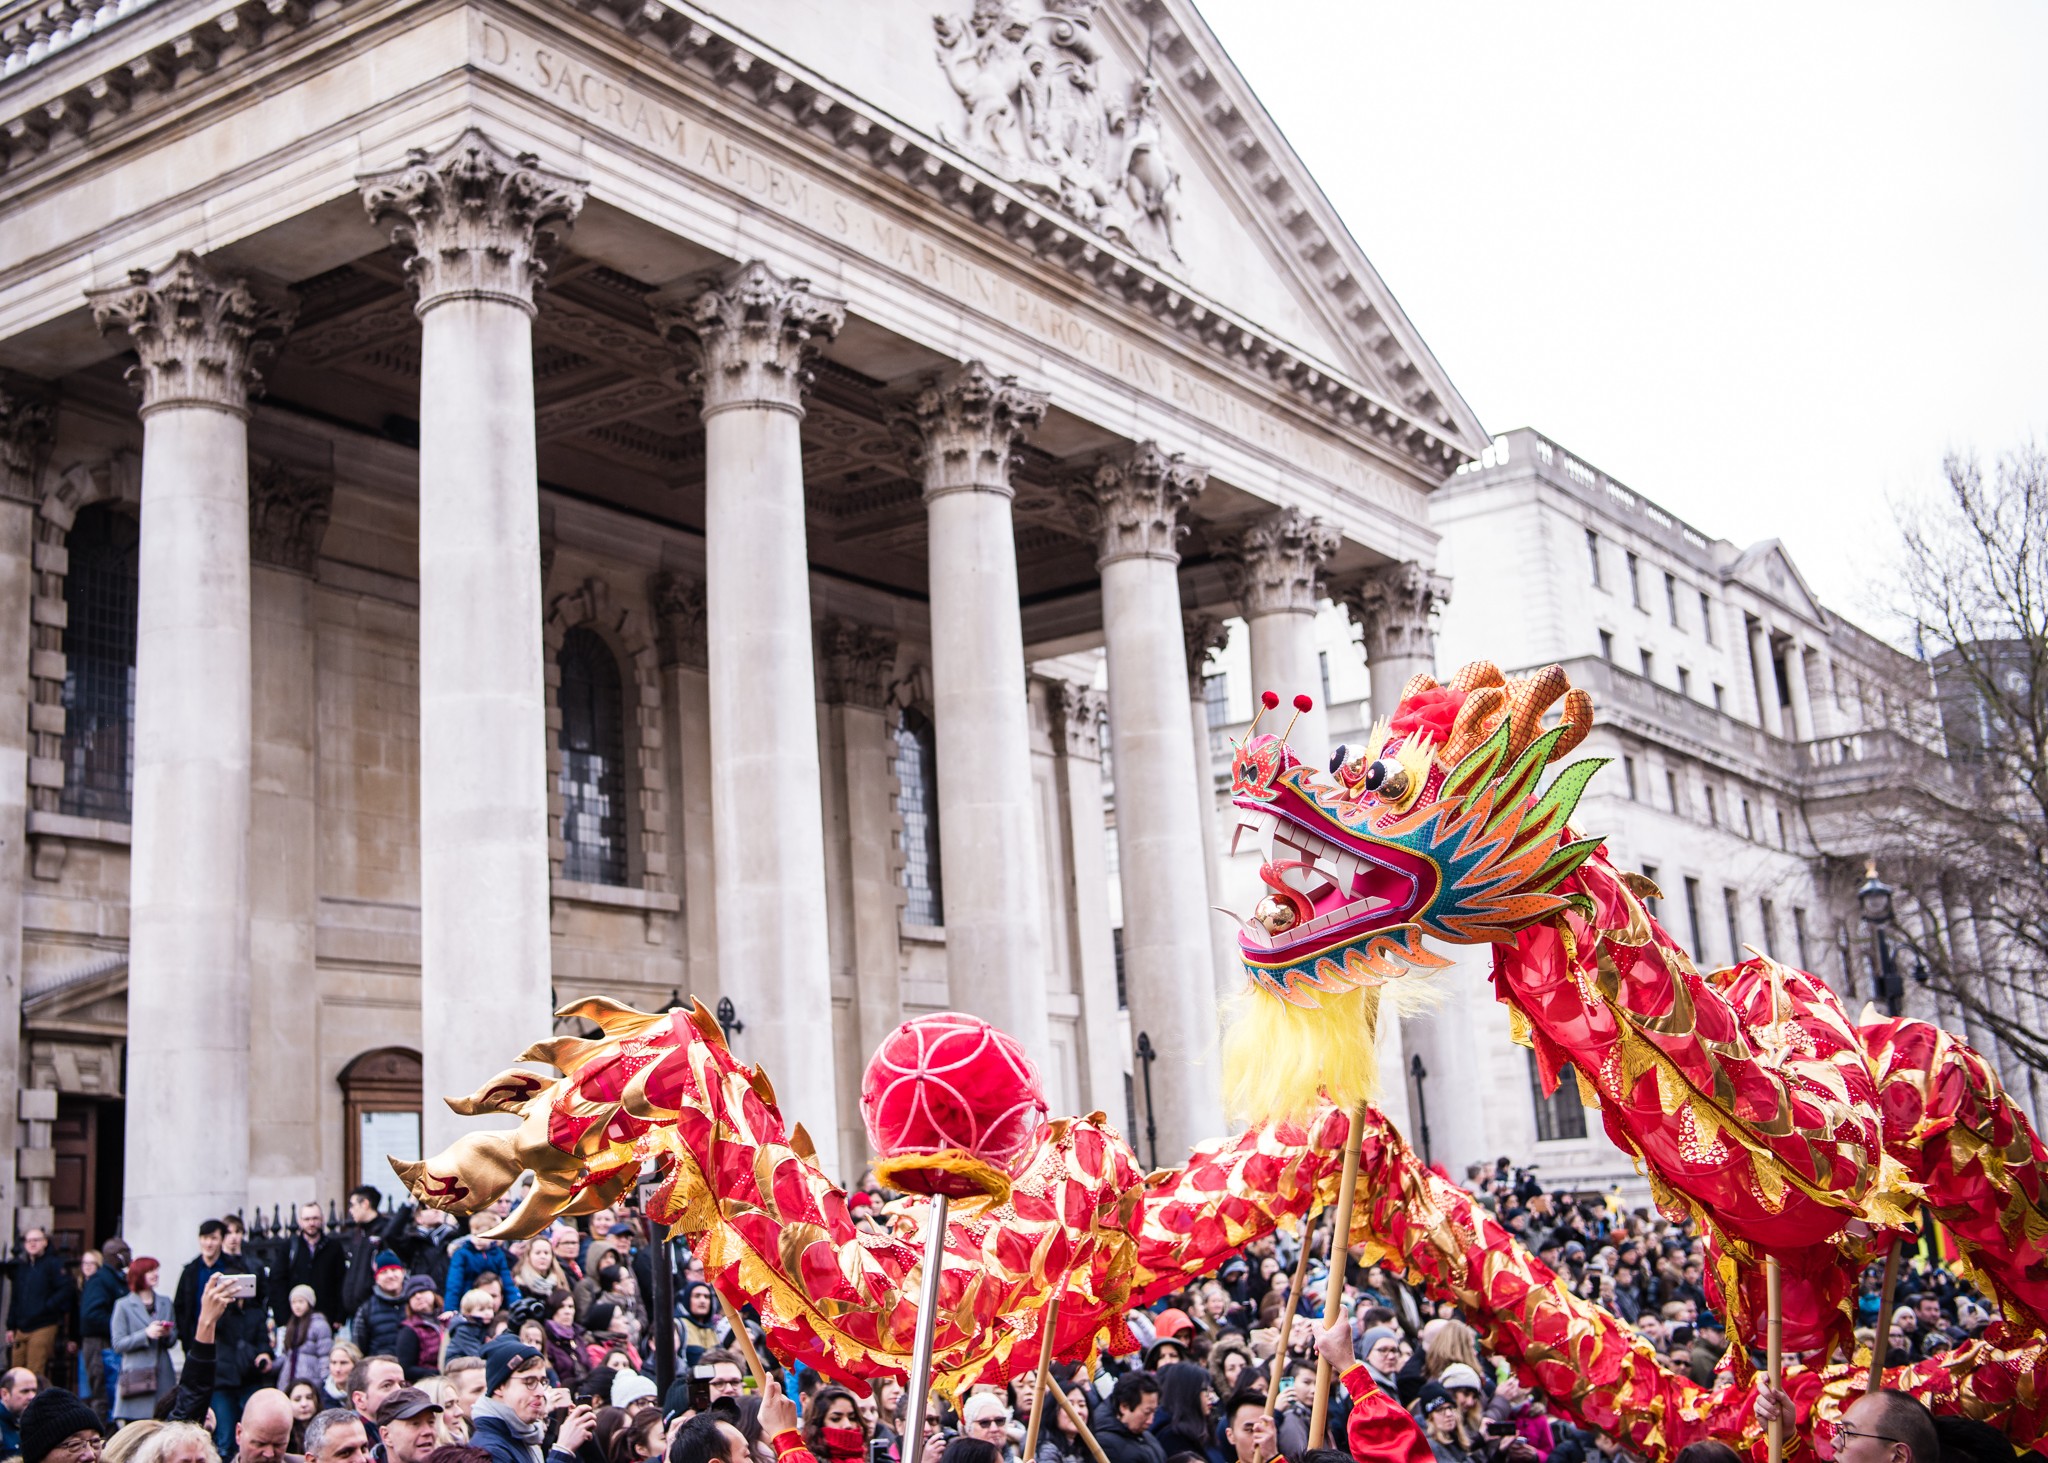 A dragon float forms part of the Lunar New Year parade as it passes the National Gallery in Trafalgar Square in London in 2017.